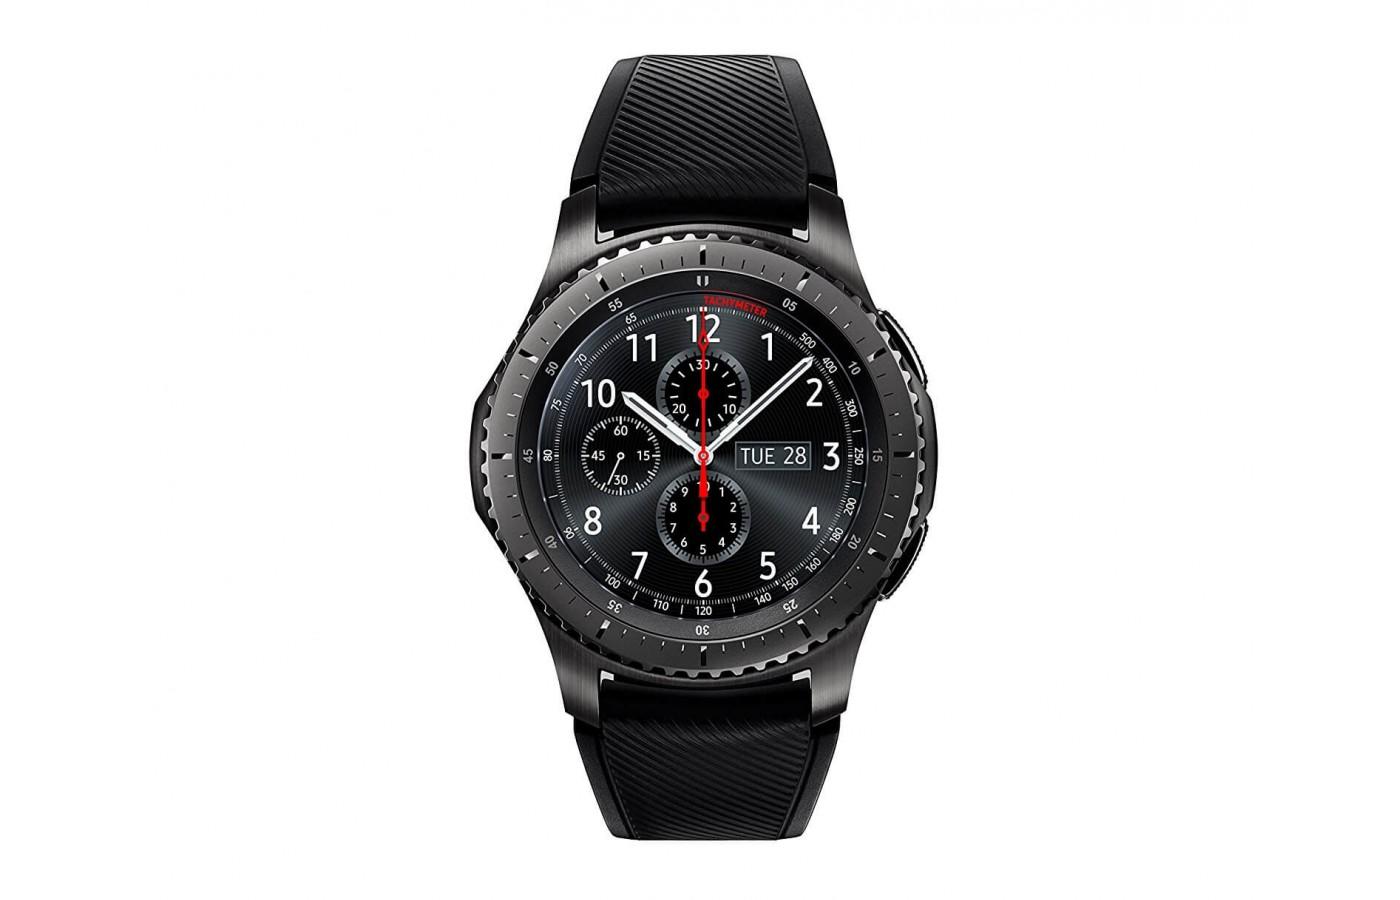 the Samsung Gear S3 Frontier watch face is always on